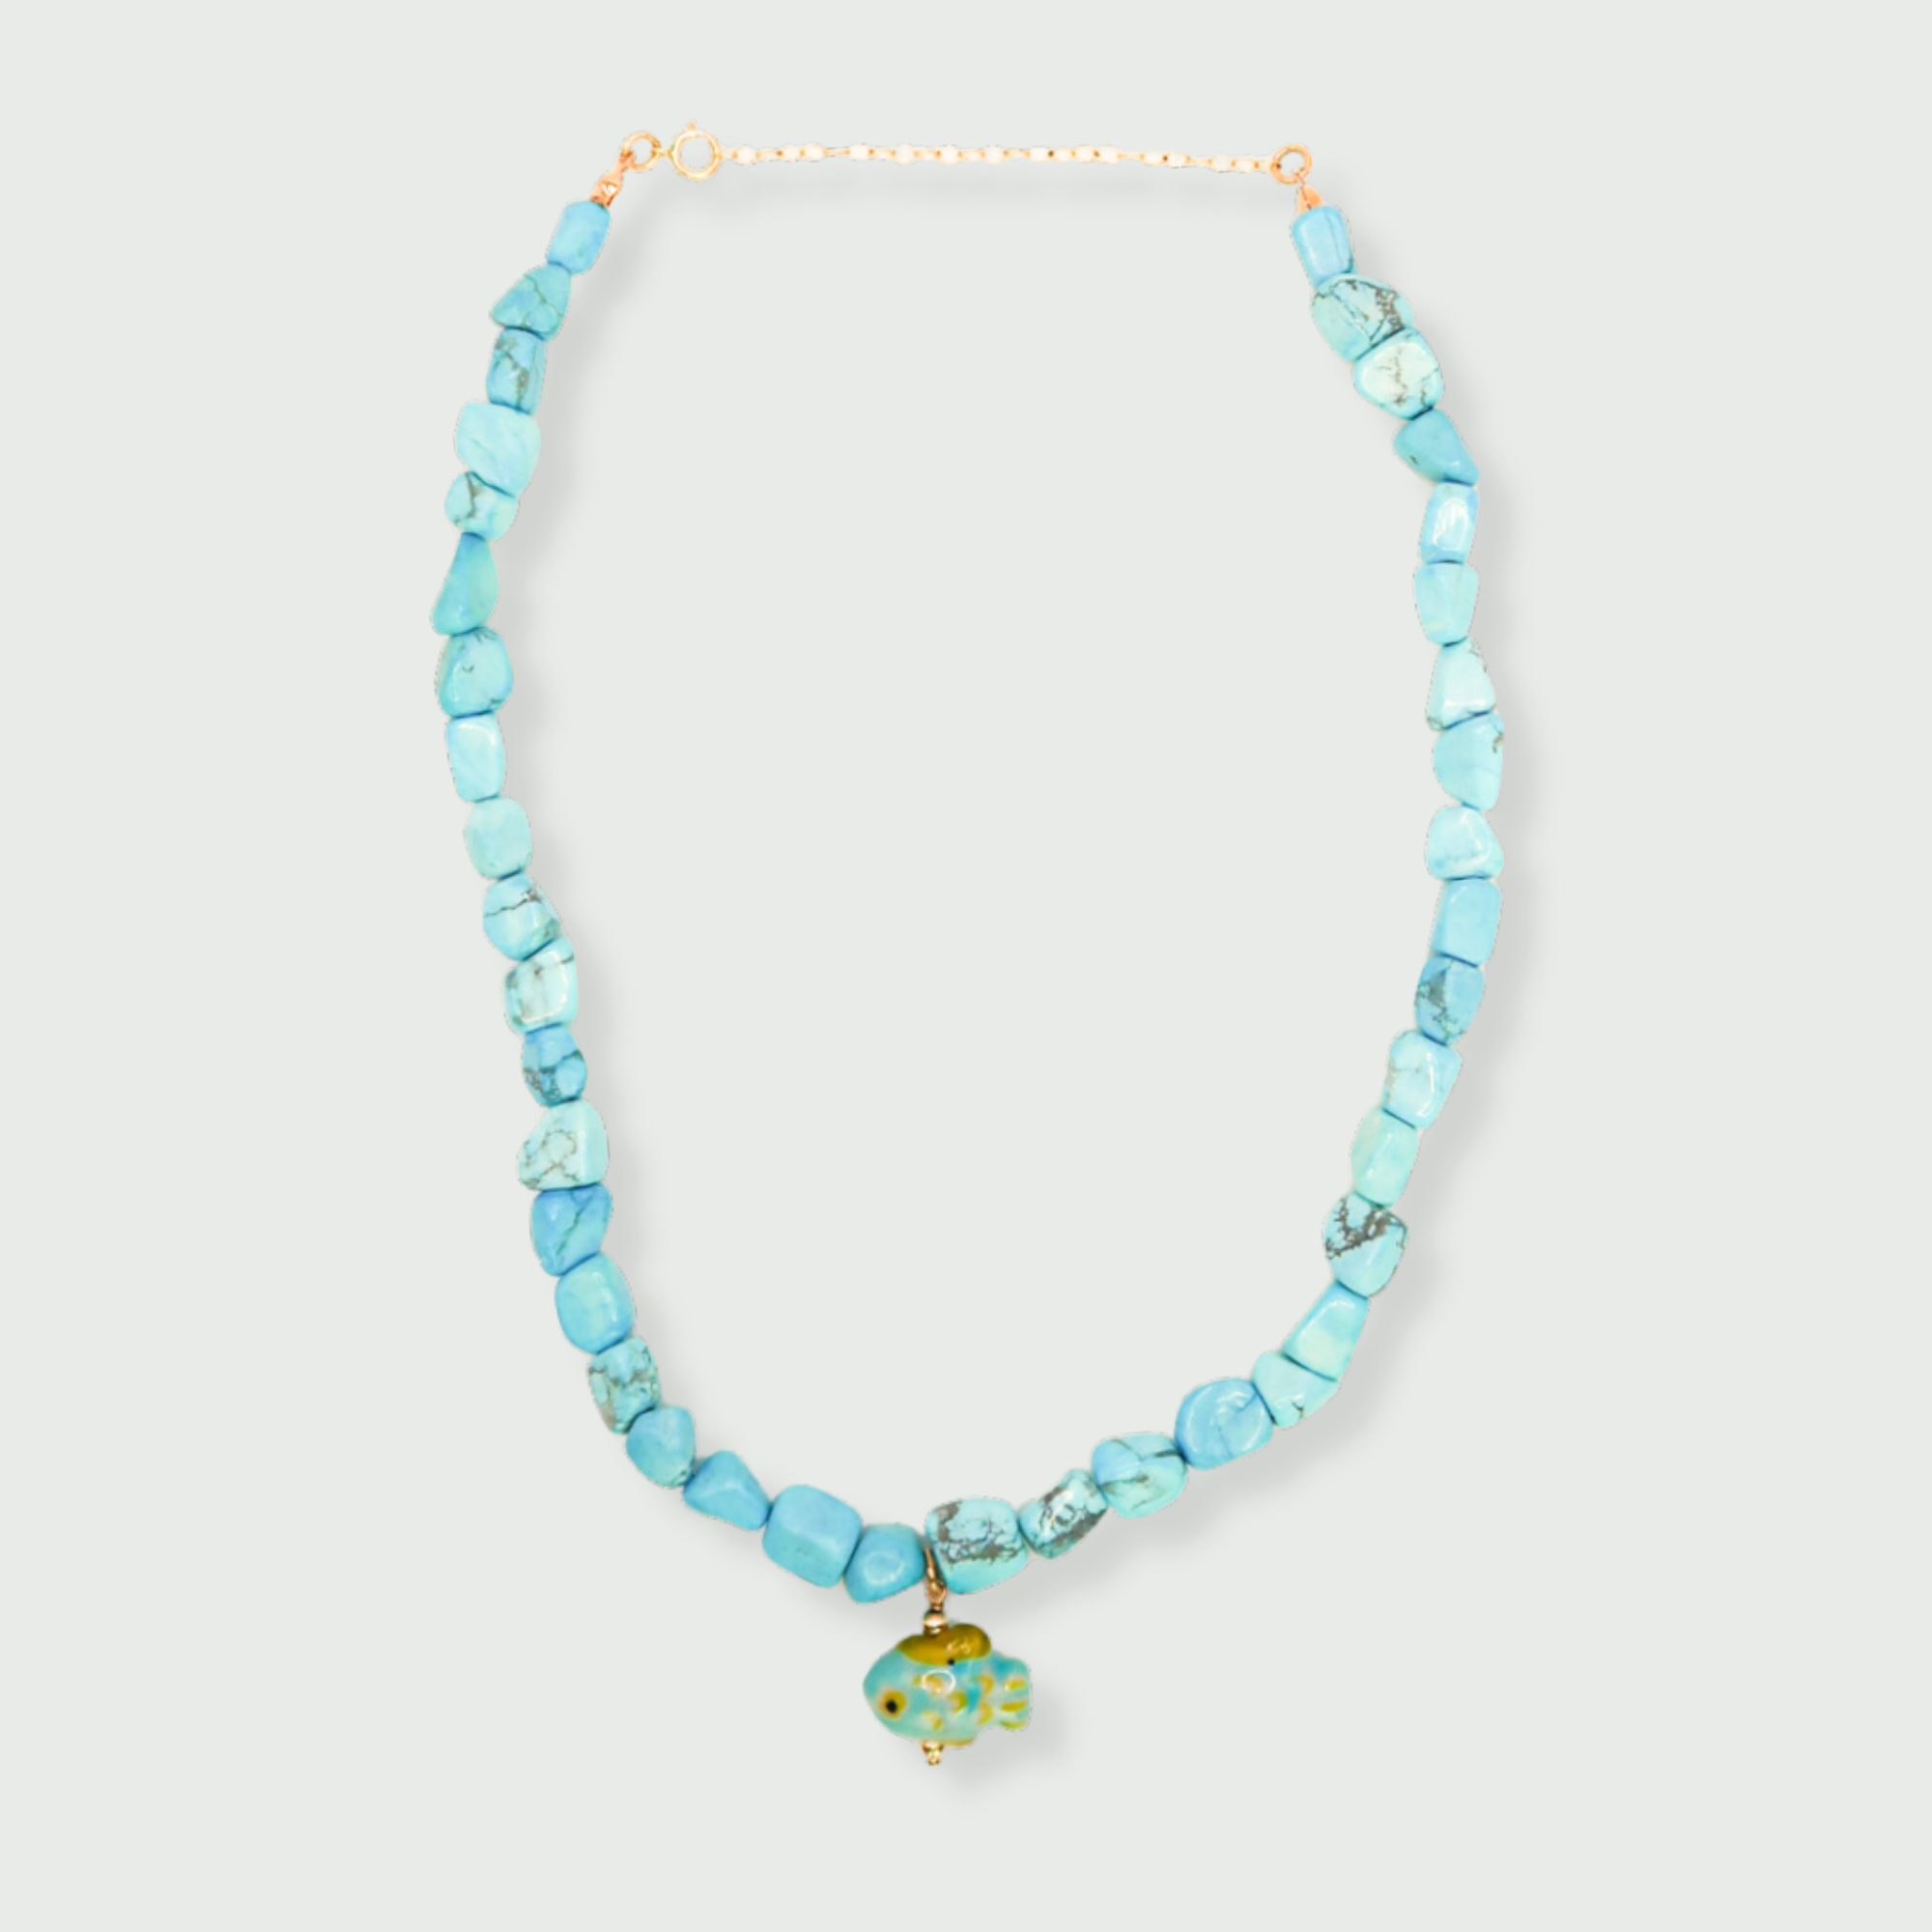 Amazonite Beaded Necklace with Fish Charm